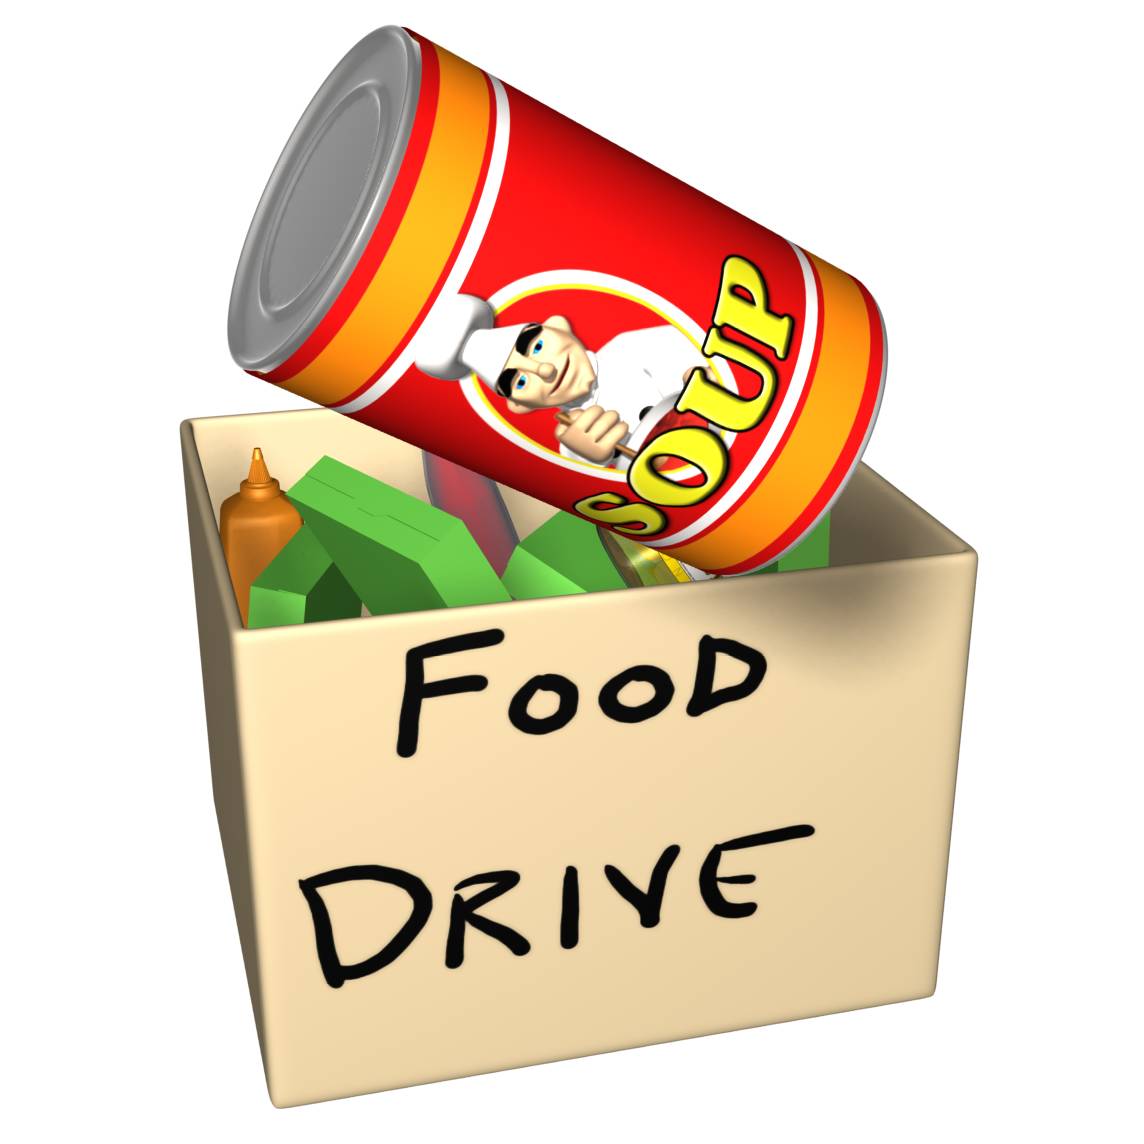 Viewing gallery for canned food drive clip art clipart kid.